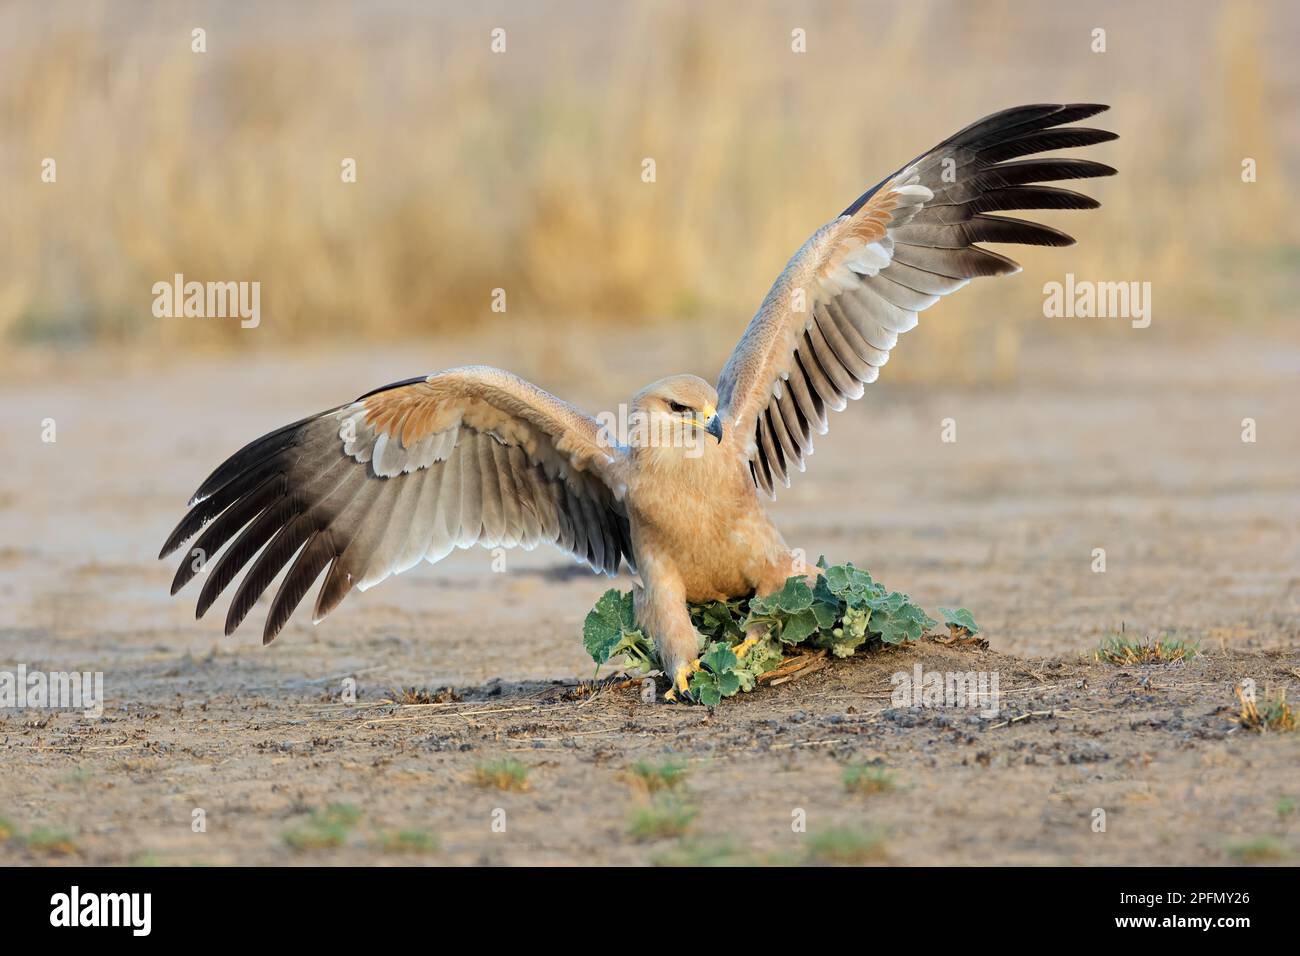 A tawny eagle (Aquila rapax) hunting on the ground with open wings, South Africa Stock Photo